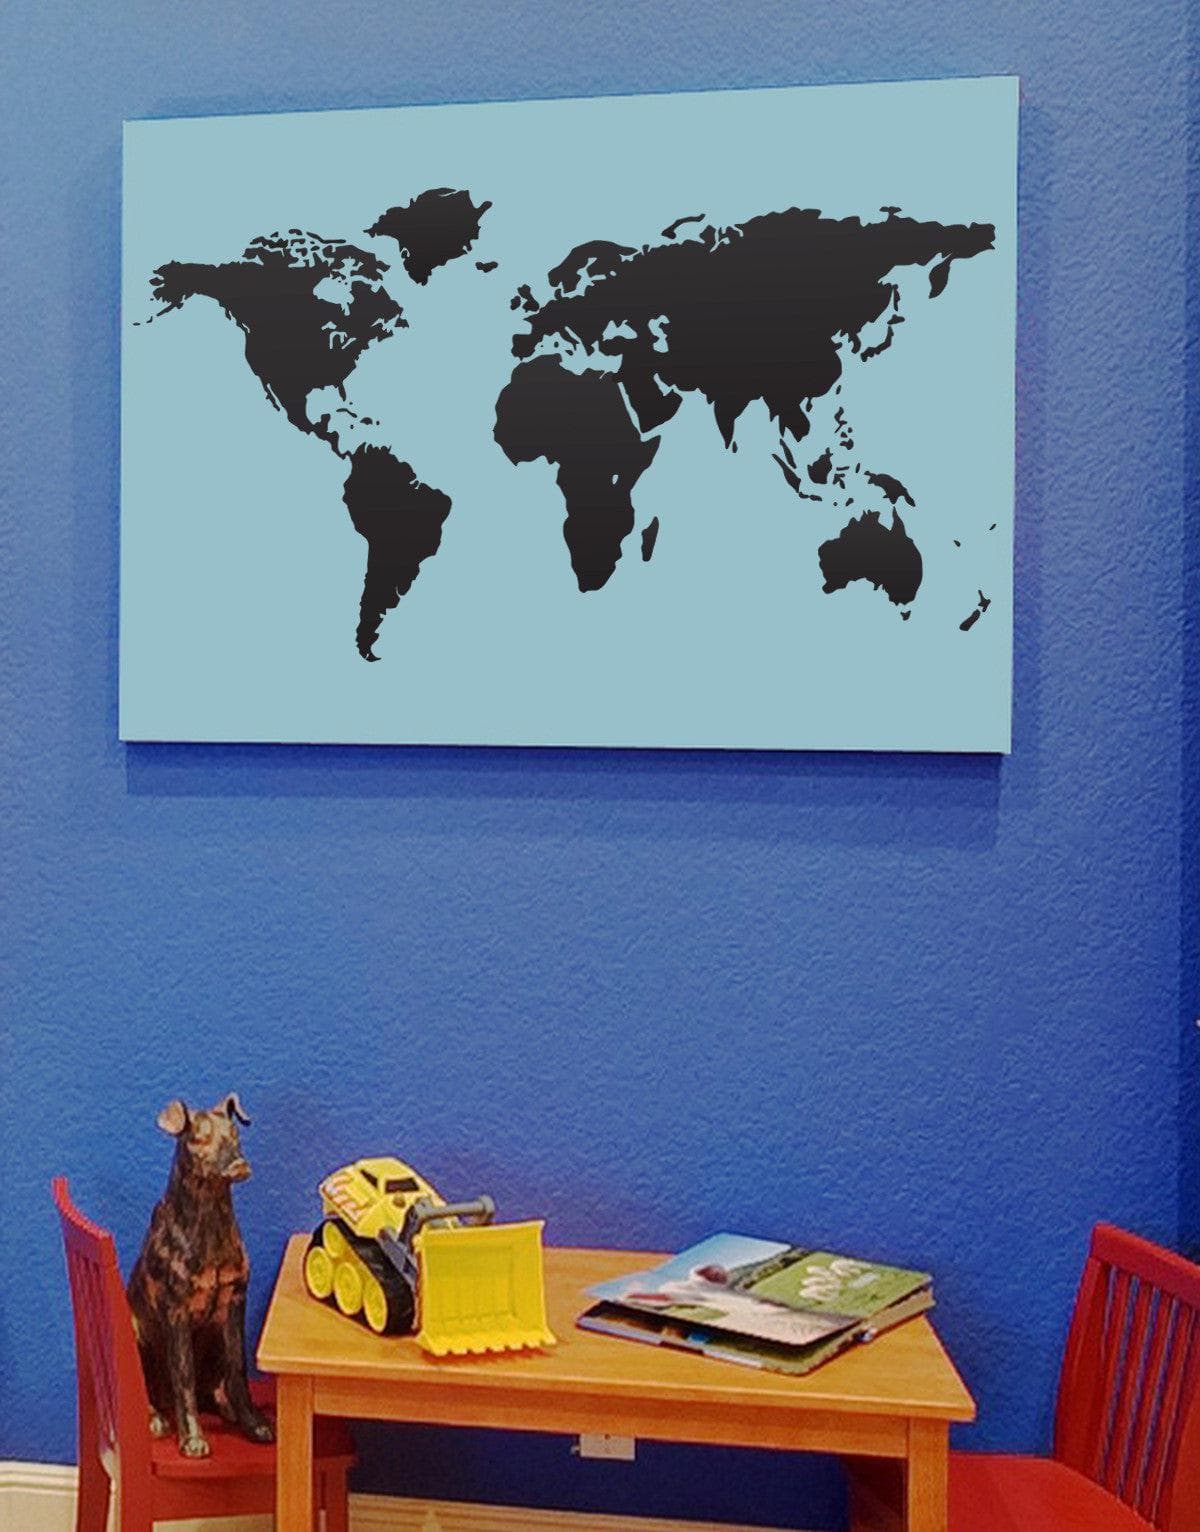 Black world map on a light blue wall above a table and red chairs.